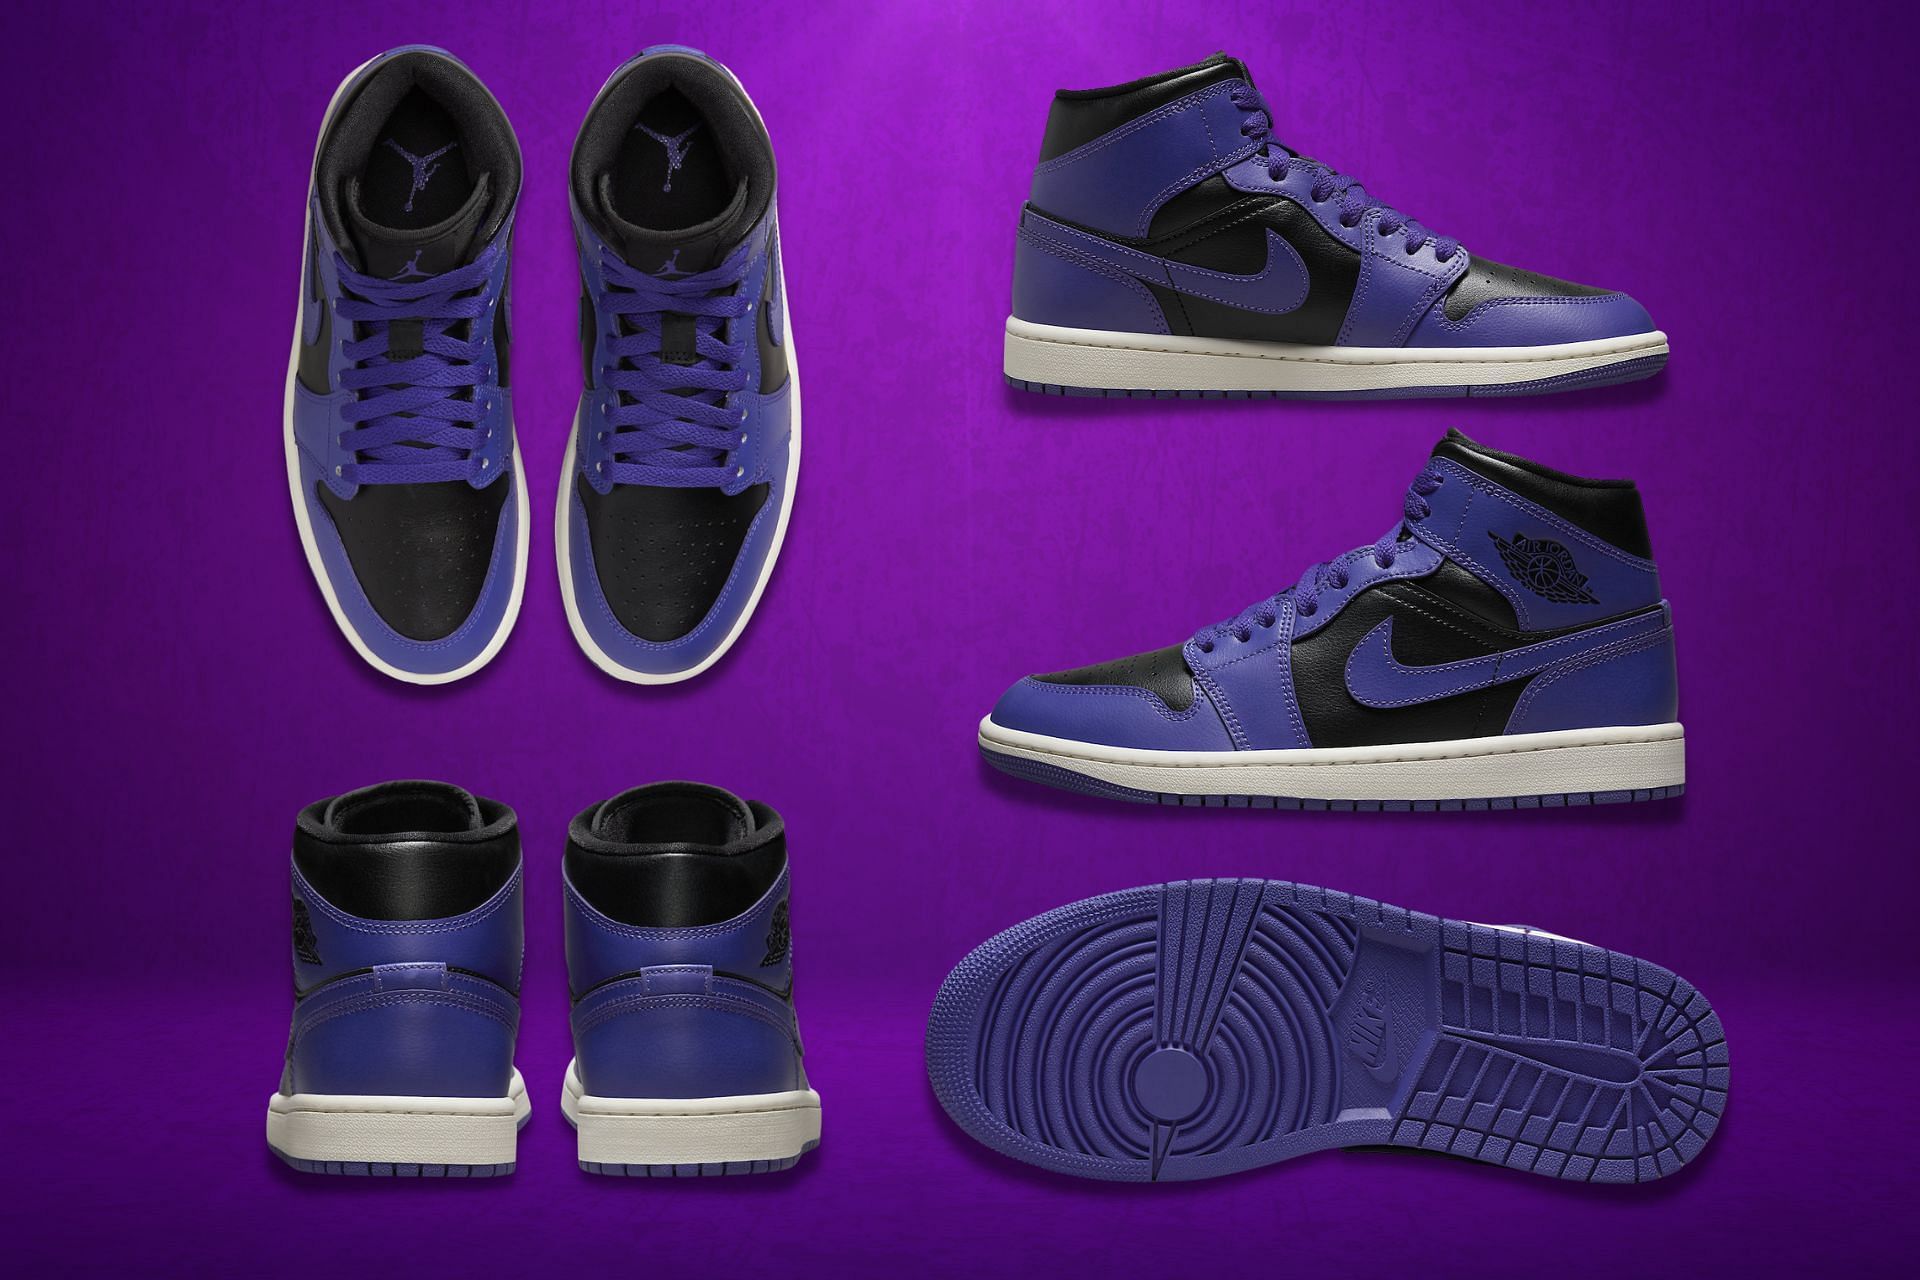 The Sleek 'Black & Dark Concord' Colorway Takes Over The Air